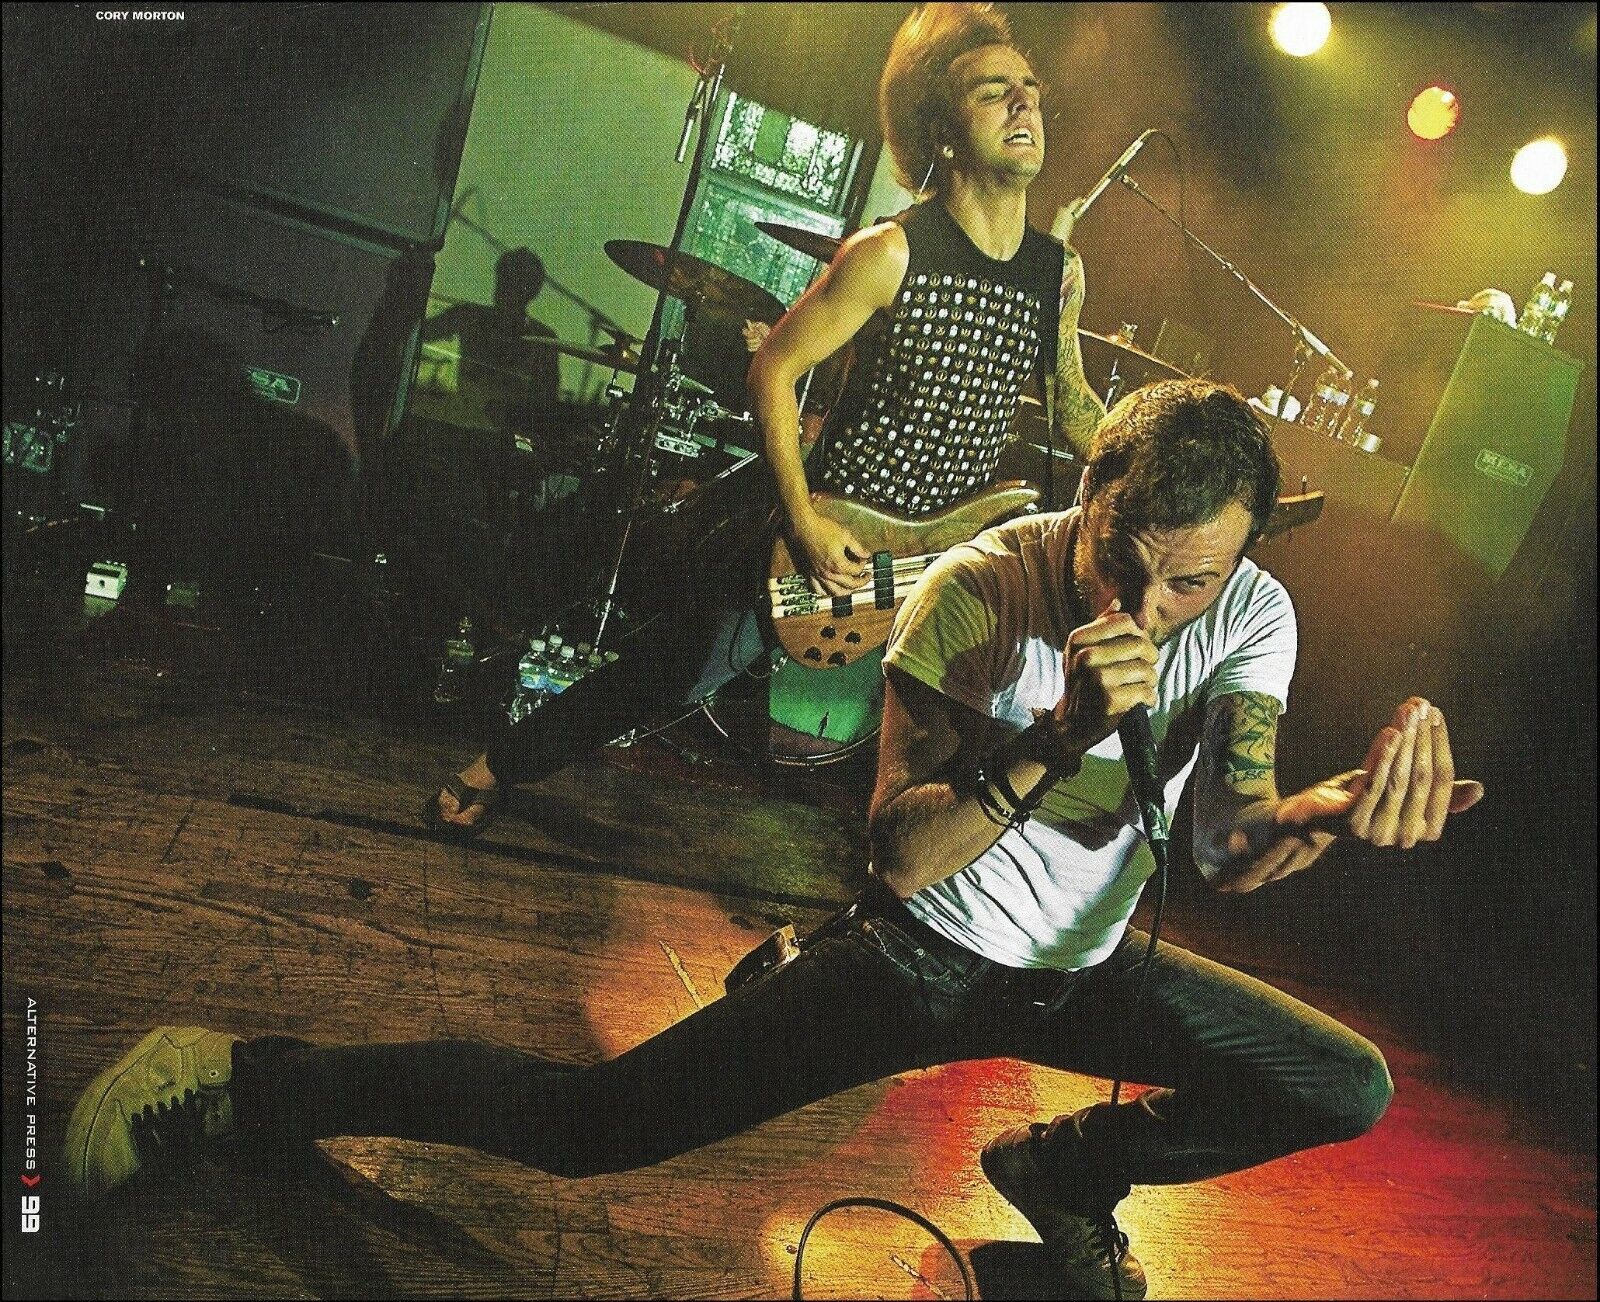 Primary image for August Burns Red Jake Luhrs Dustin Davidson Ibanez Bass guitar pin-up photo